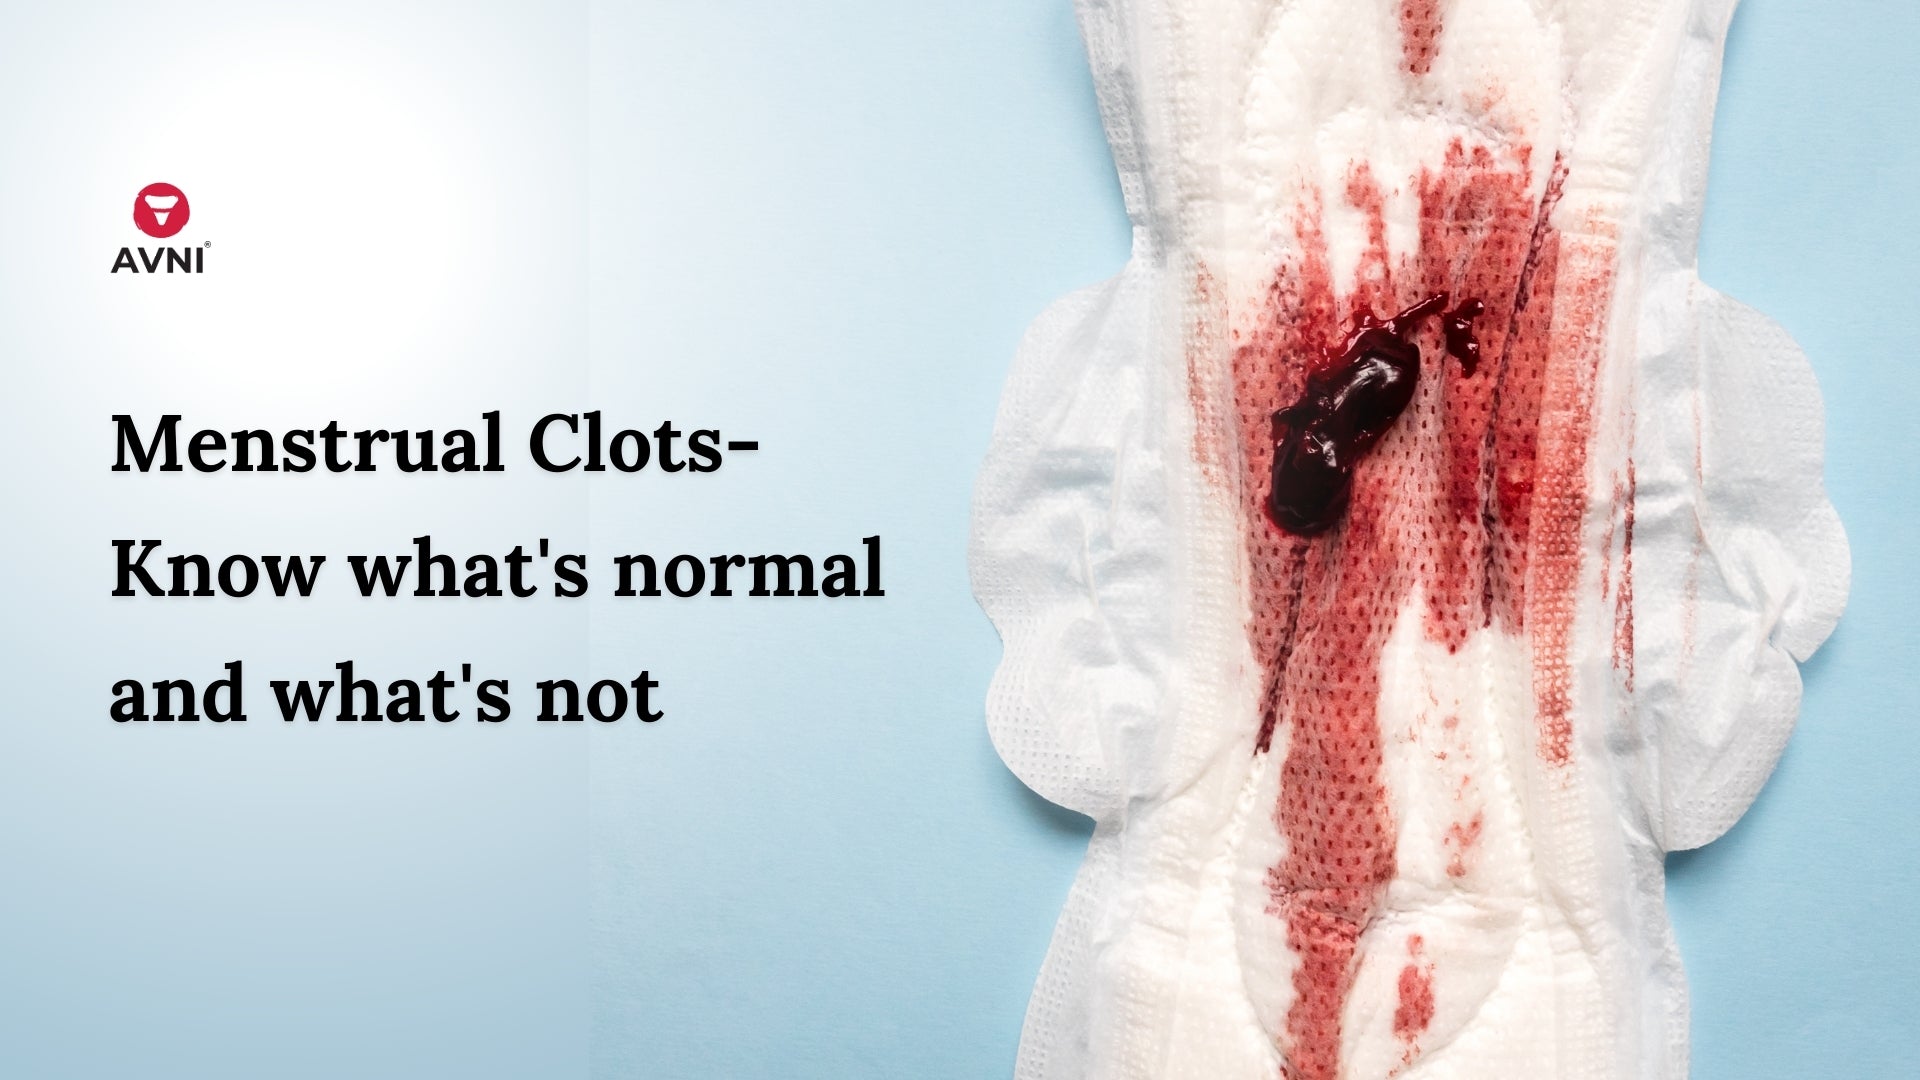 Menstrual Clots- Know what's normal and what's not